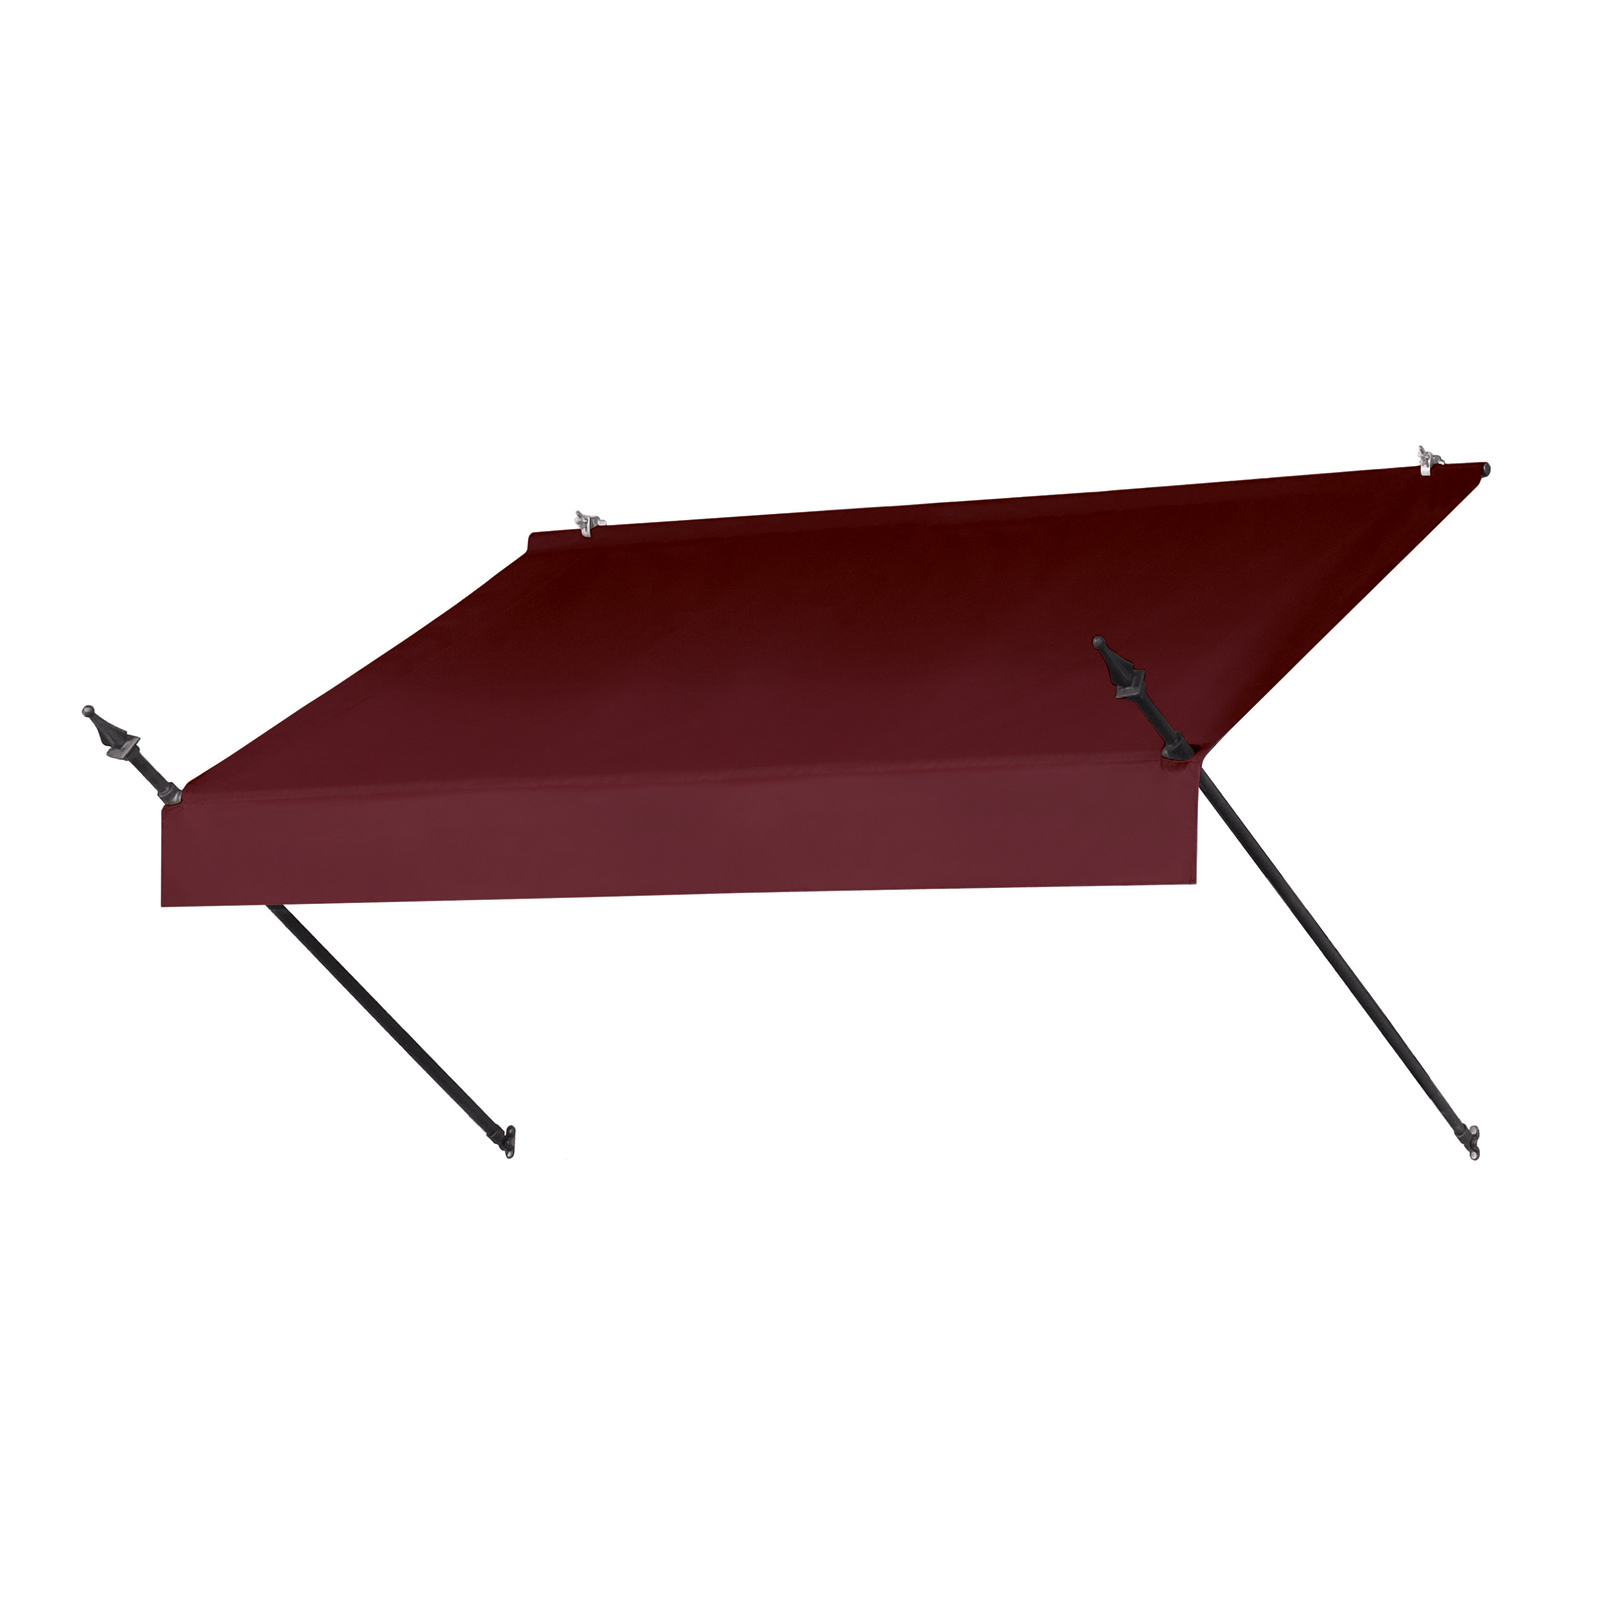 Awnings in a Box&reg; 6' Designer Style Awning Replacement Cover in Assorted Colors